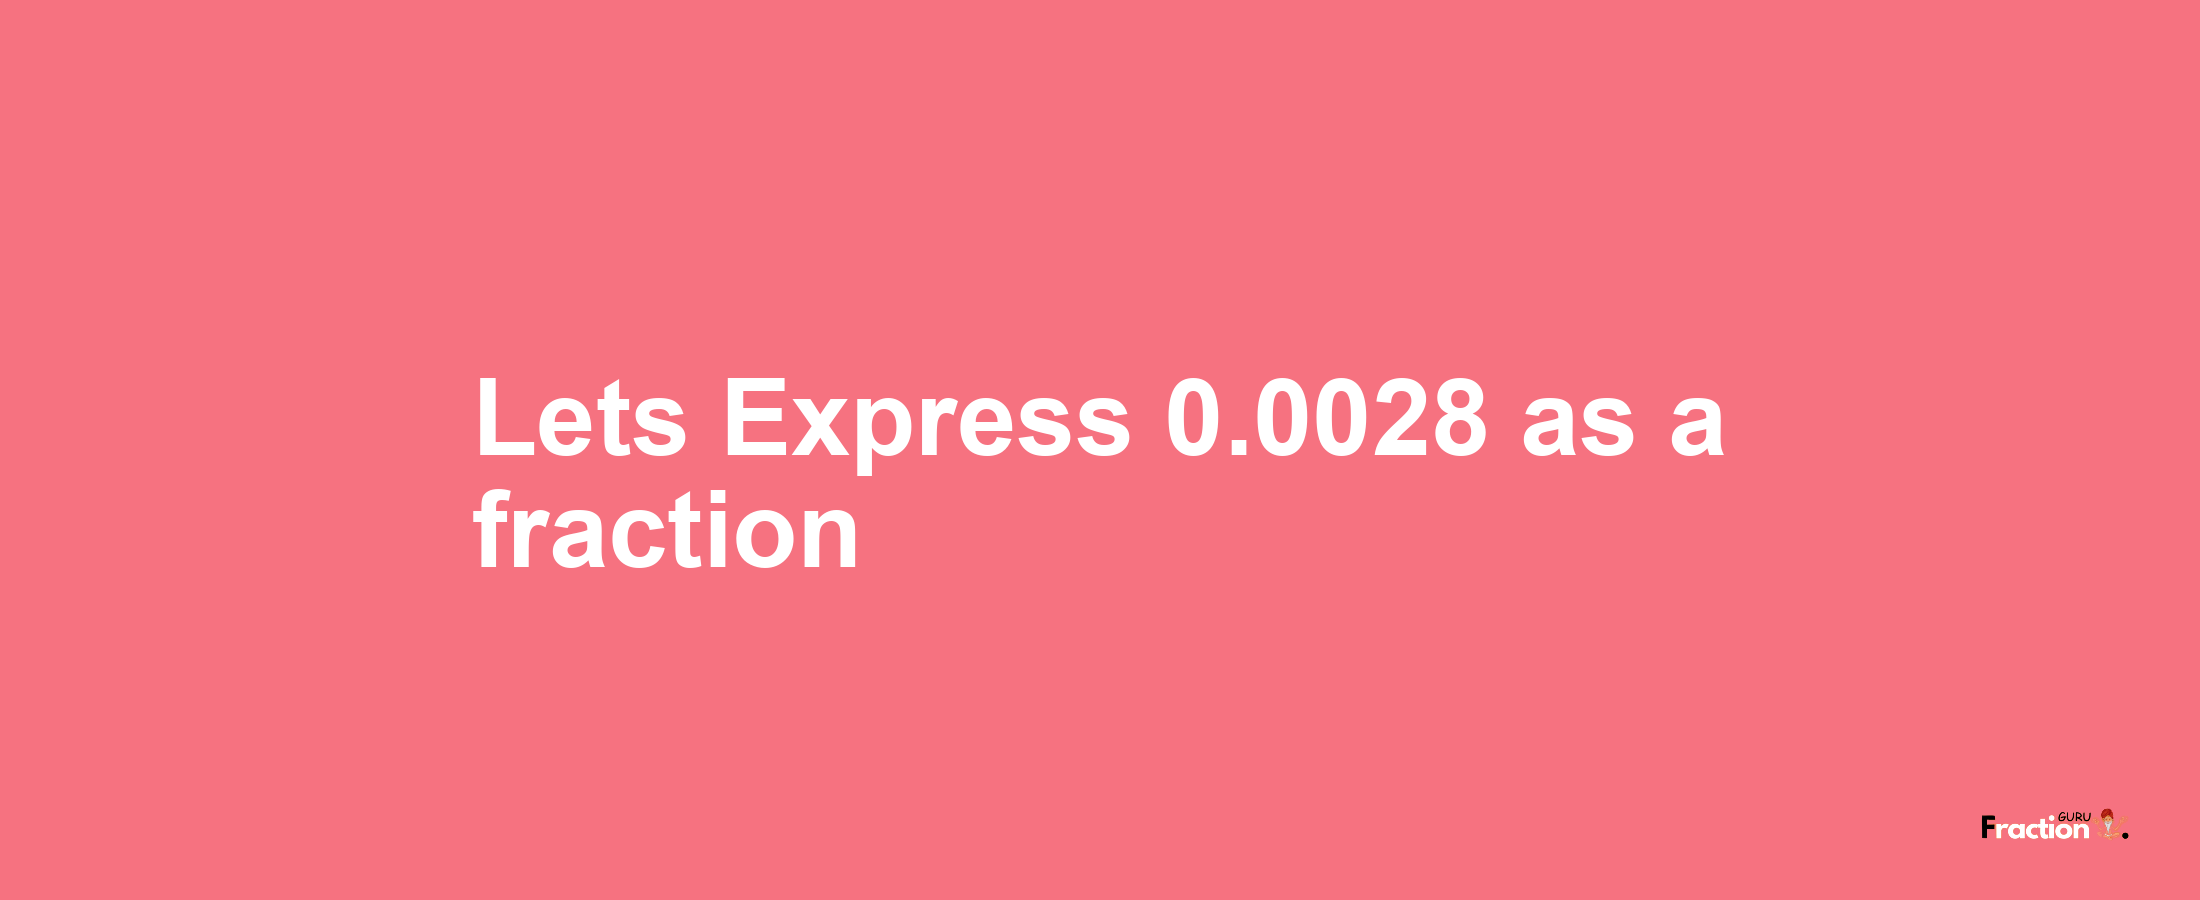 Lets Express 0.0028 as afraction